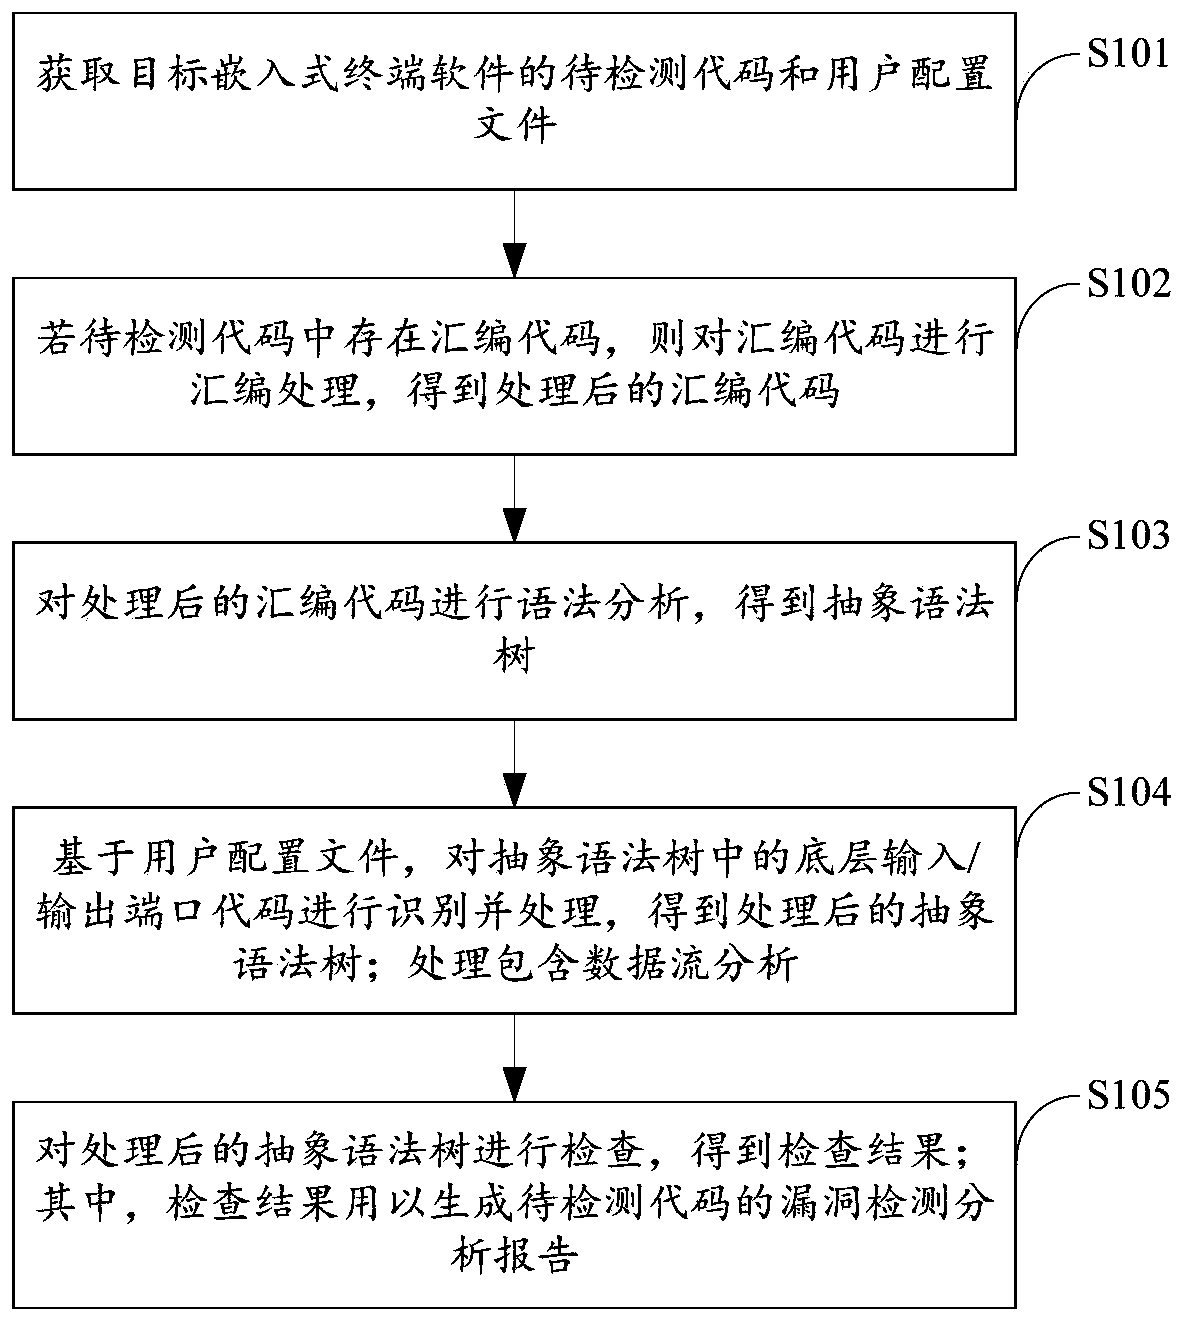 Embedded terminal software code vulnerability detection method and device based on model inspection